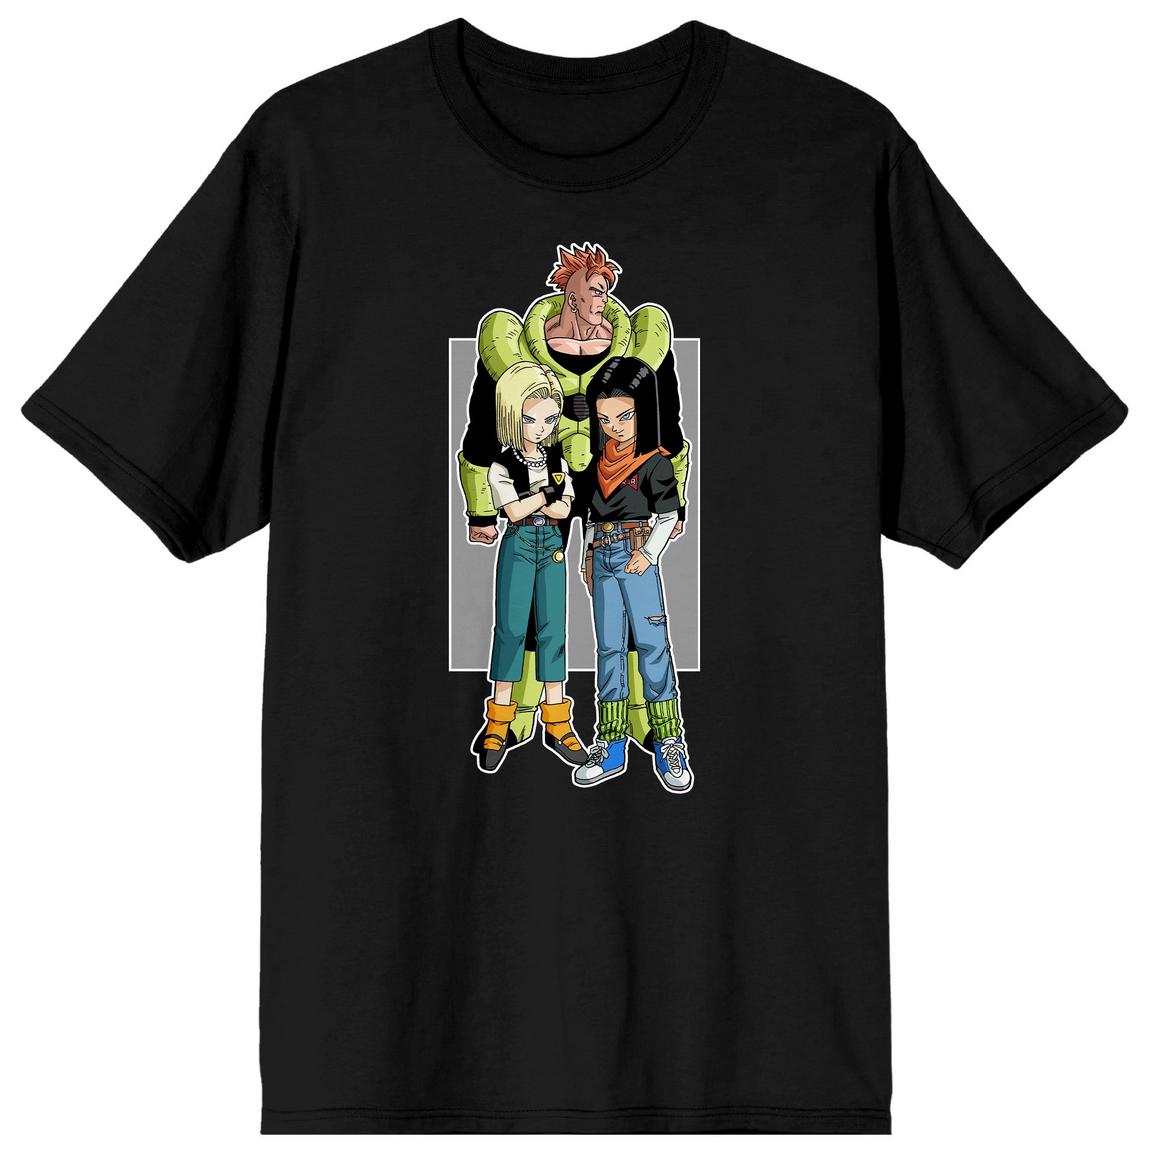 Dragon Ball Z Anime Android 16, 17, and 18 Characters Men's Black Short Sleeve T-Shirt, Size: Large, Bioworld Merchandising